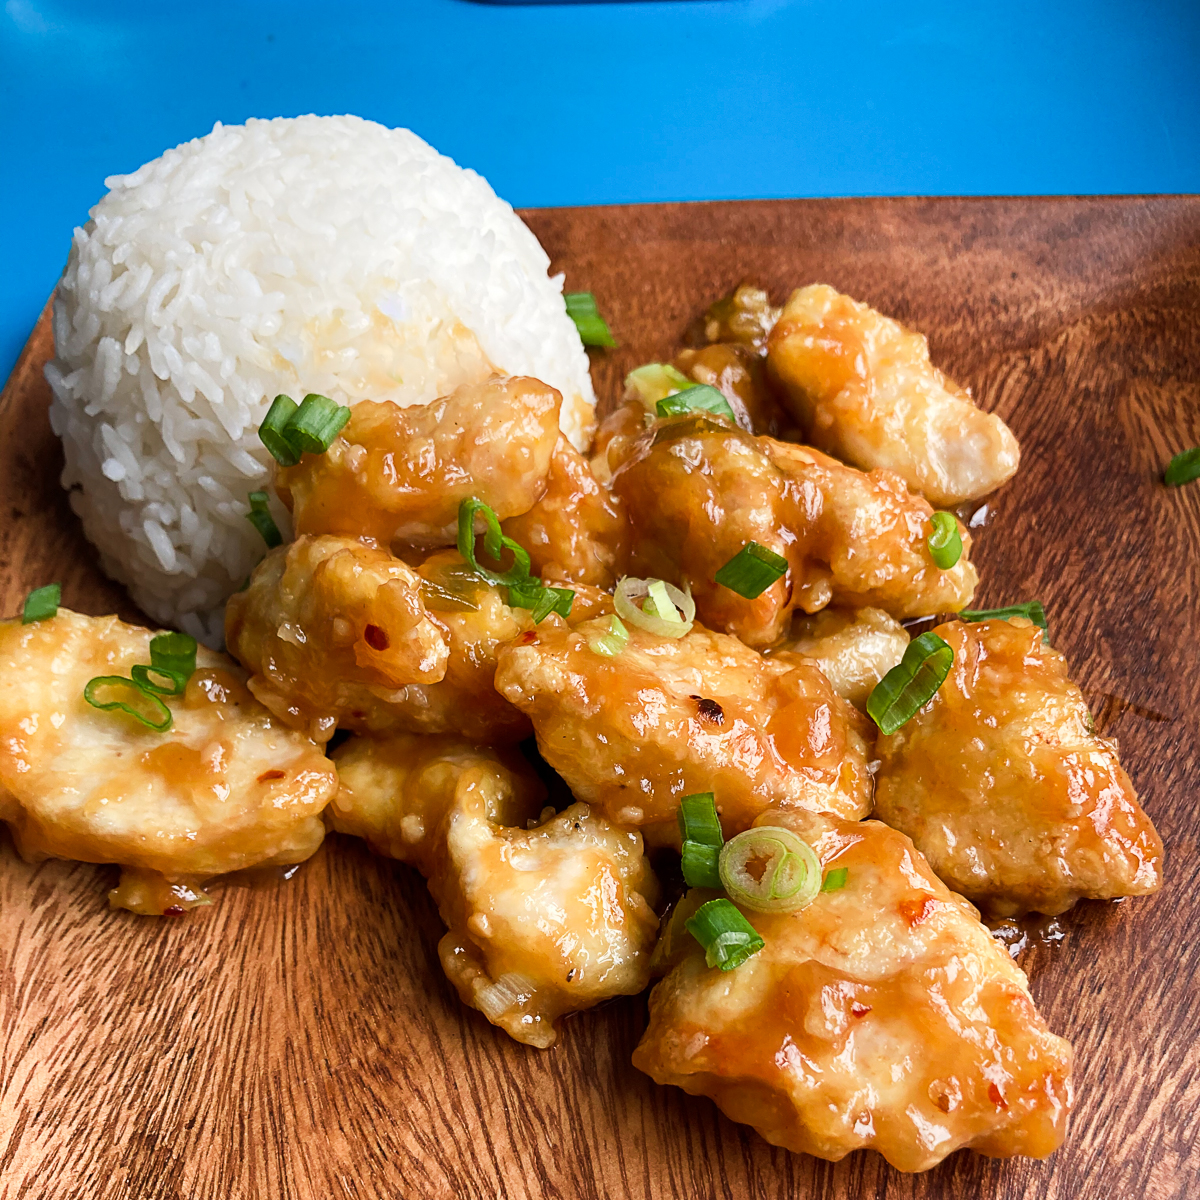 Orange chicken with green onions on a wooden plate. White rice ball on the left side of the plate.